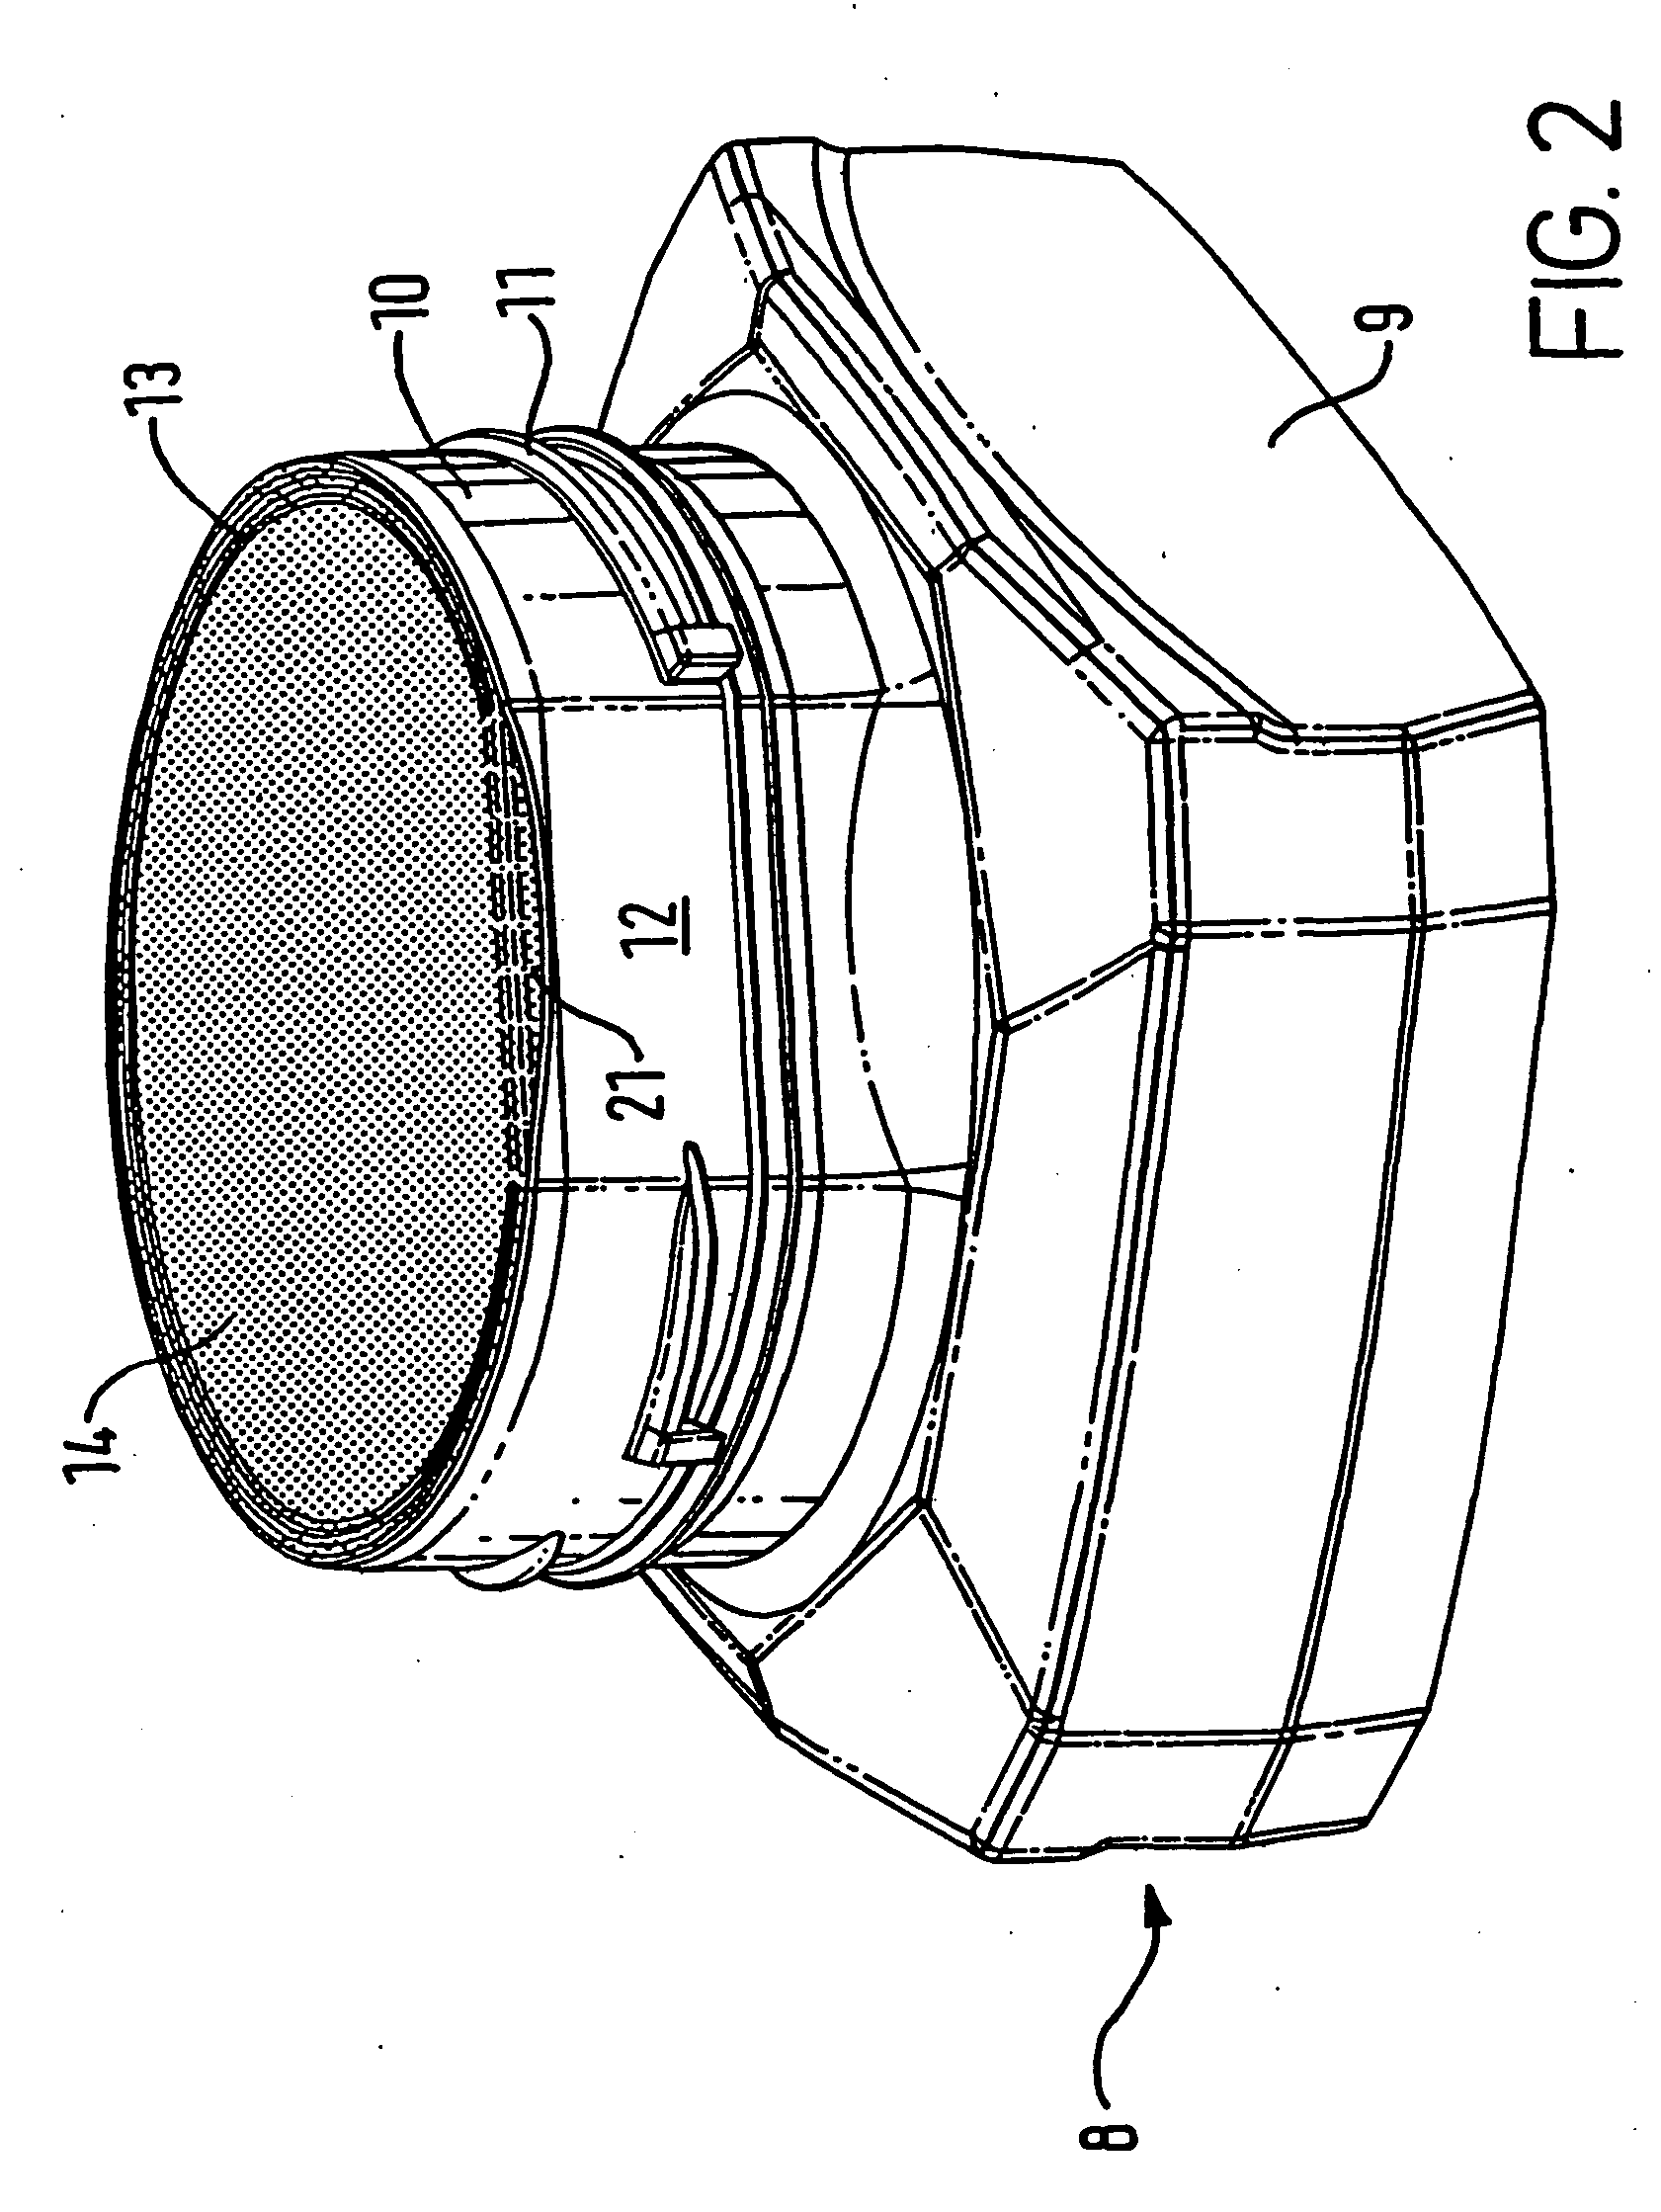 Packaging comprising a container and membrane